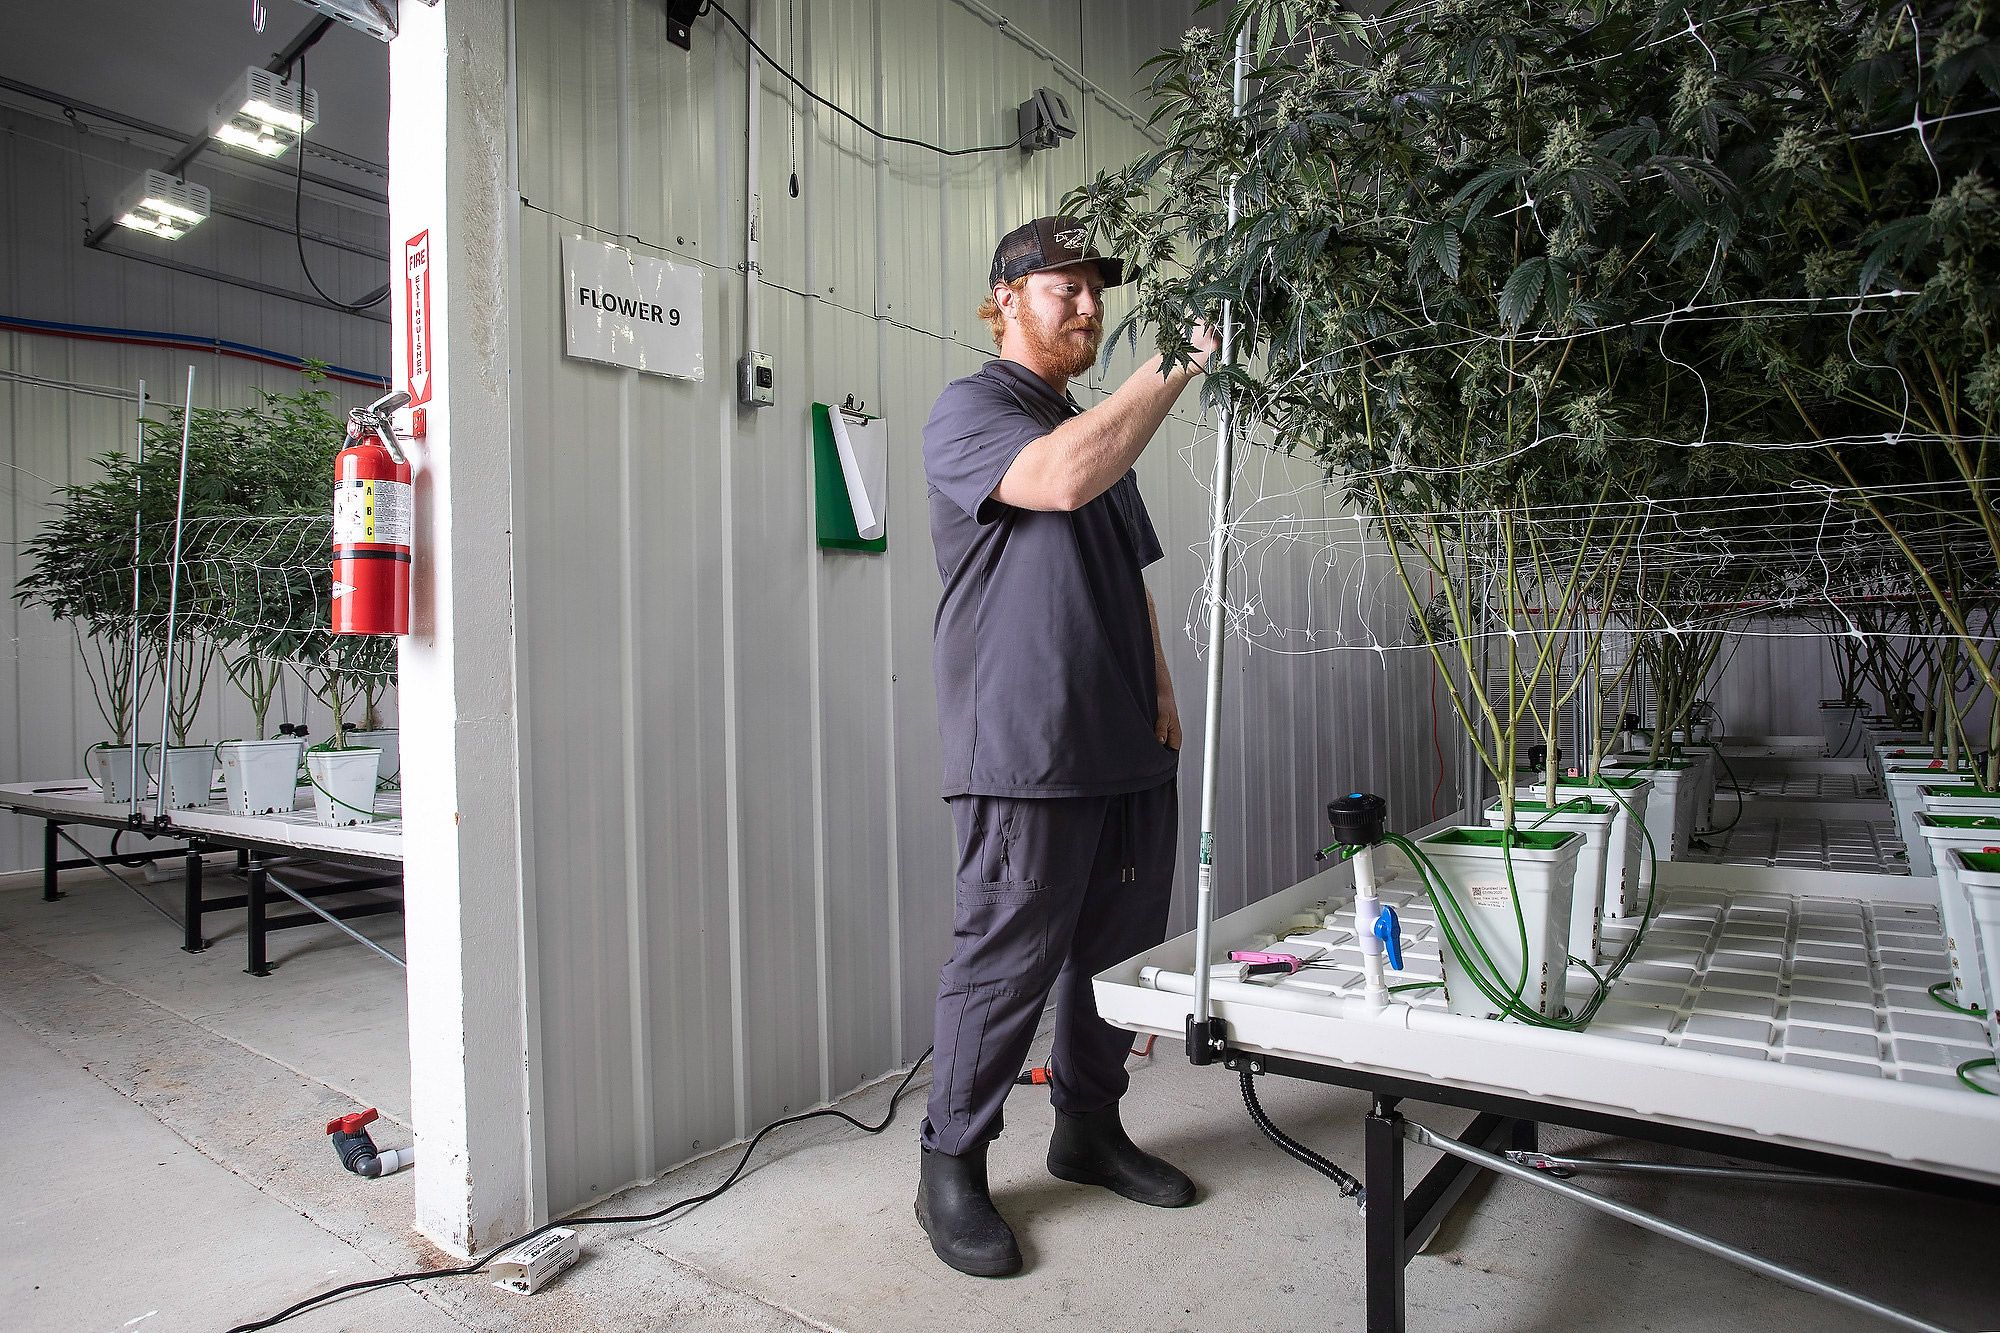 Jake Zoellner tends to marijuana plants at the Rockin Z Ranch south of Tulsa, Oklahoma. The farm formerly bred horses and the barn has been converted into an indoor grow facility.